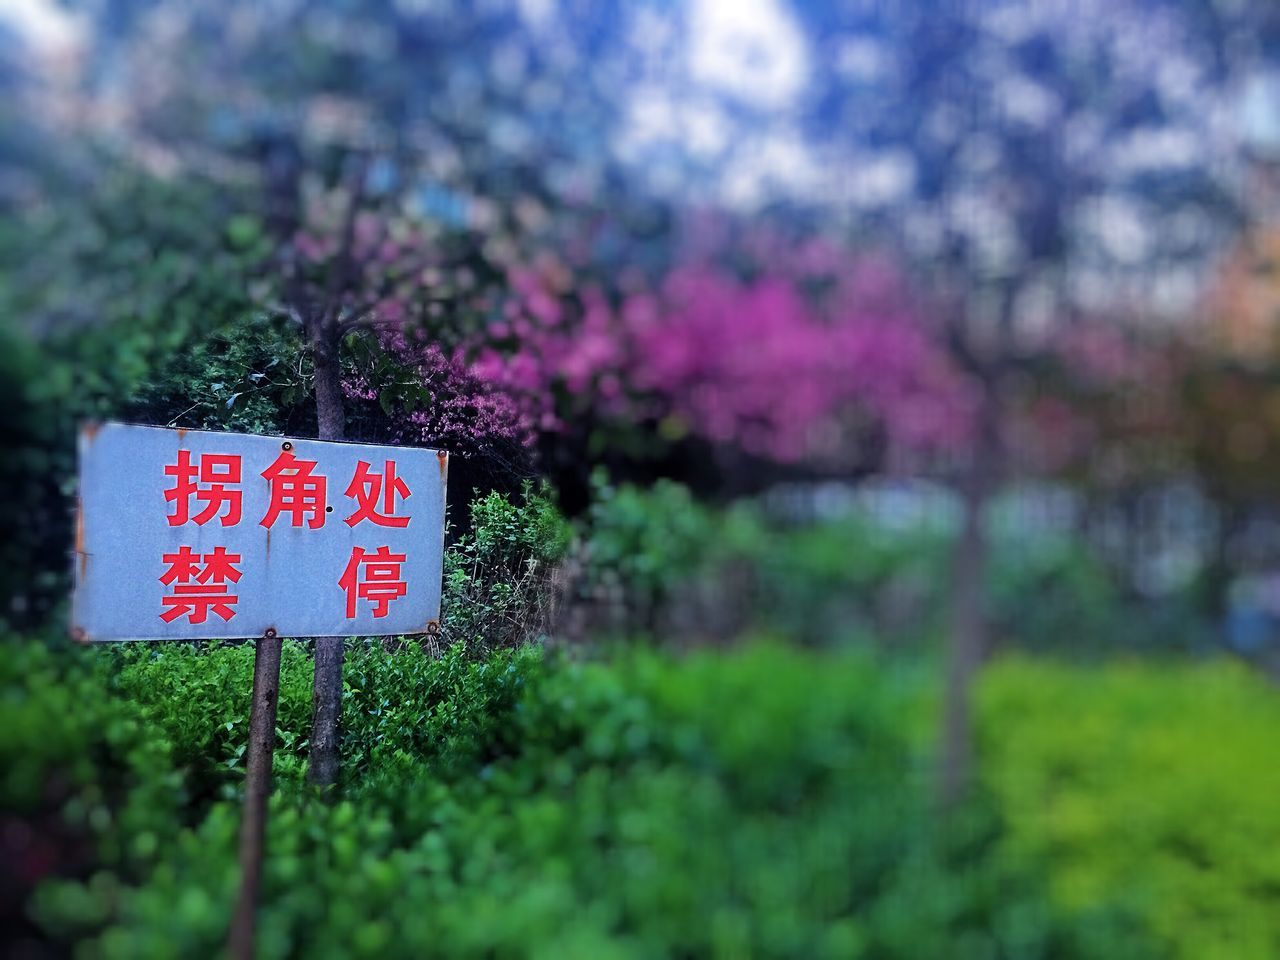 text, communication, western script, red, focus on foreground, sign, information sign, guidance, growth, close-up, non-western script, green color, selective focus, plant, capital letter, day, information, tree, outdoors, field